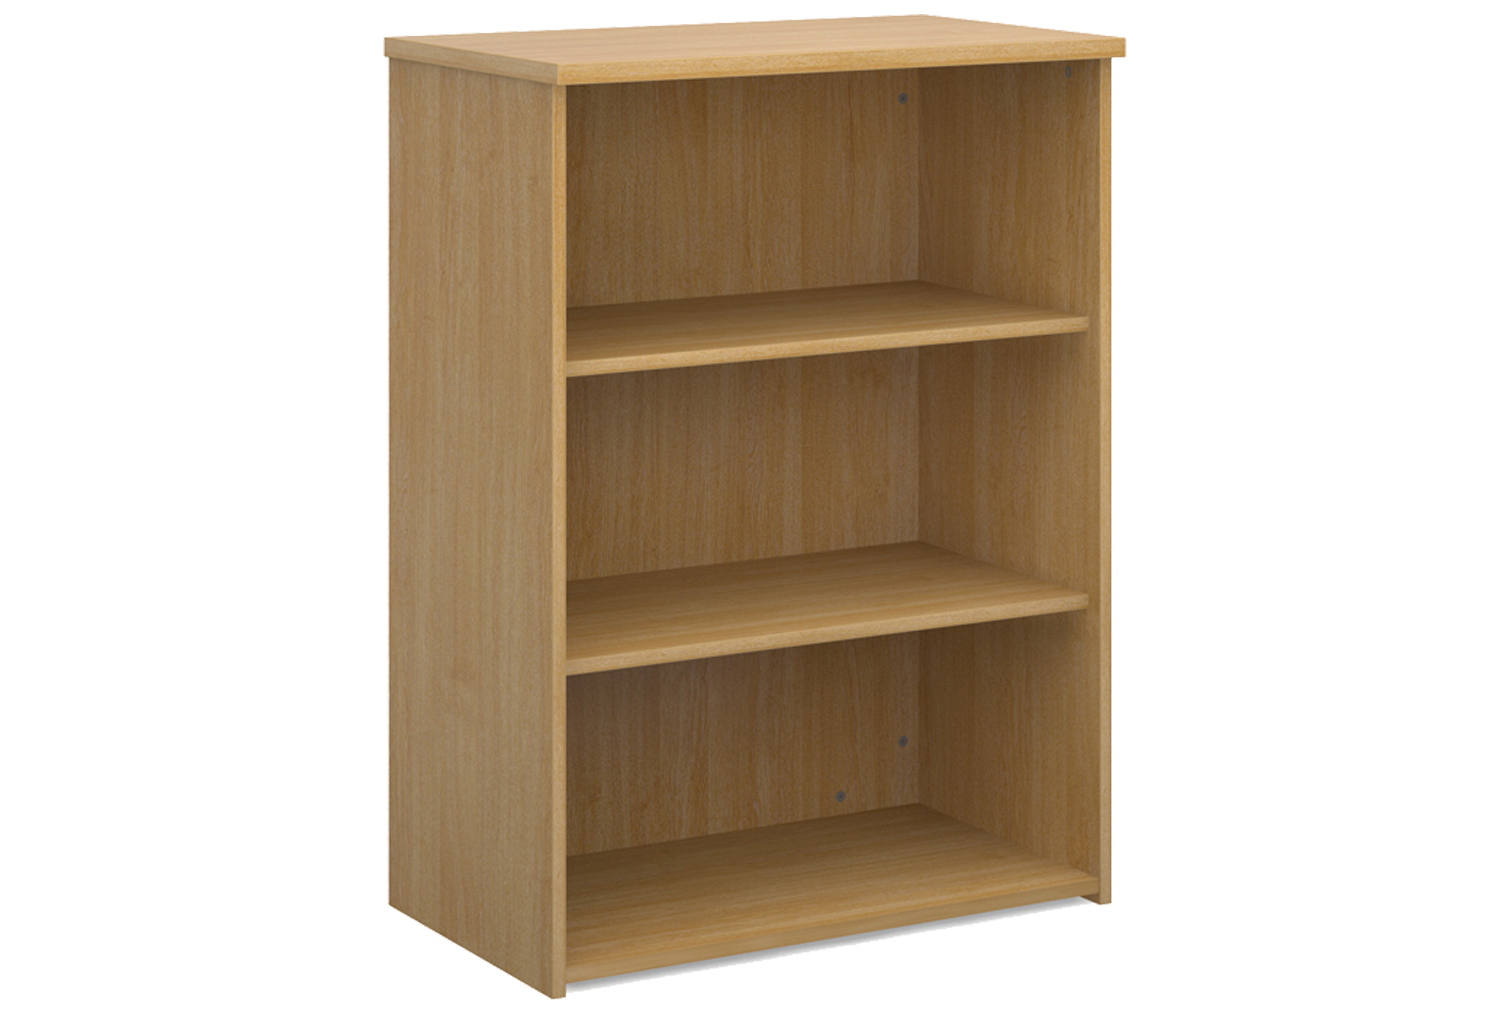 All Oak Office Bookcases, 2 Shelf - 80wx47dx109h (cm), Express Delivery